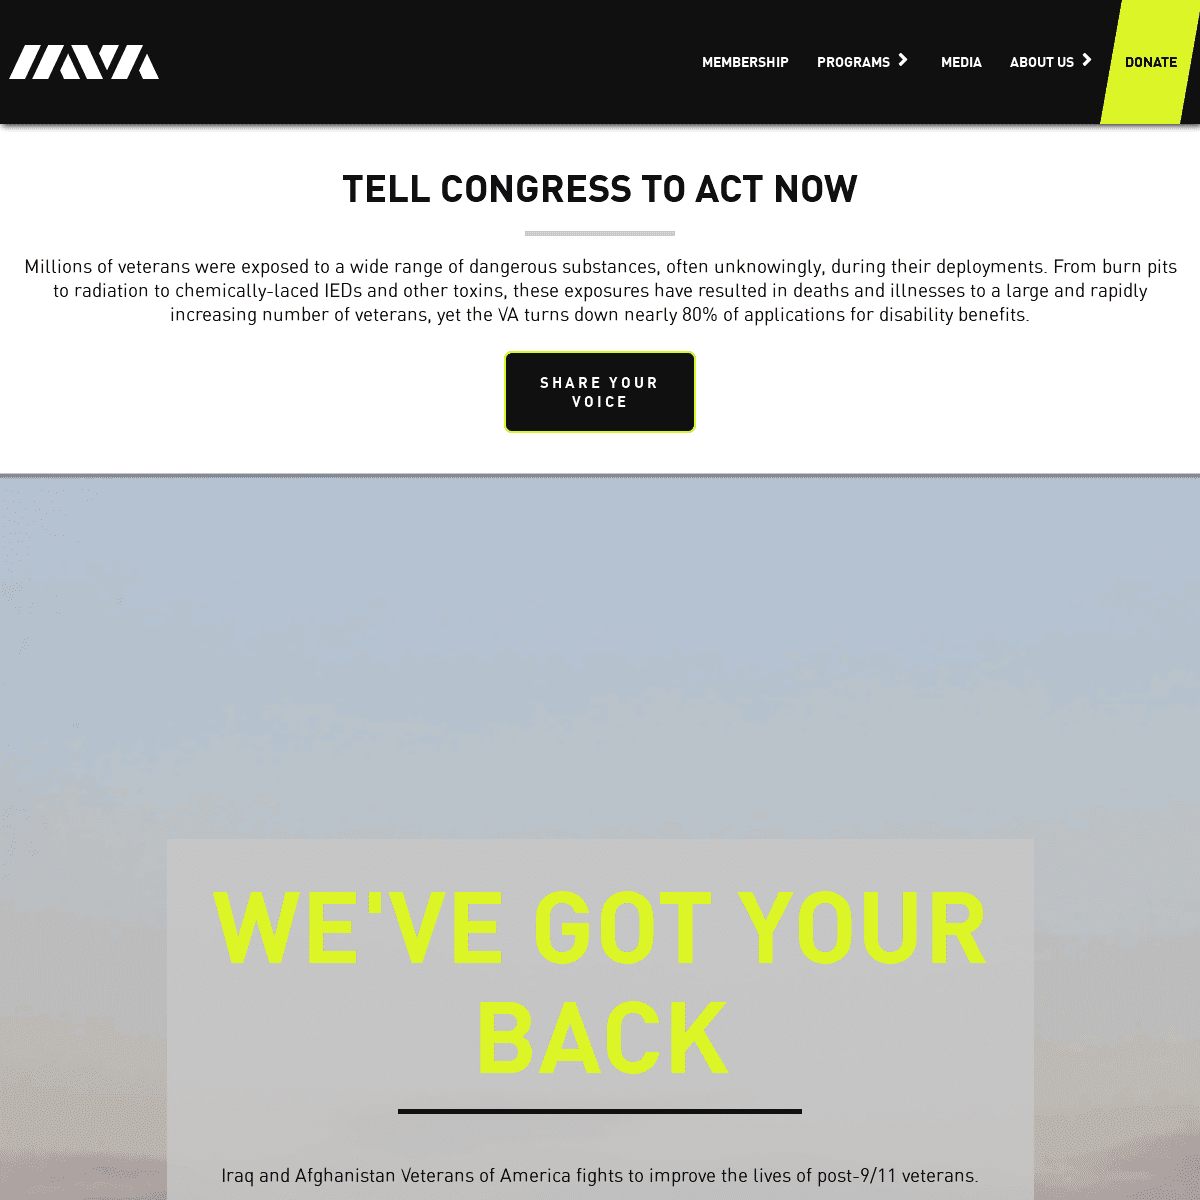 A complete backup of https://iava.org